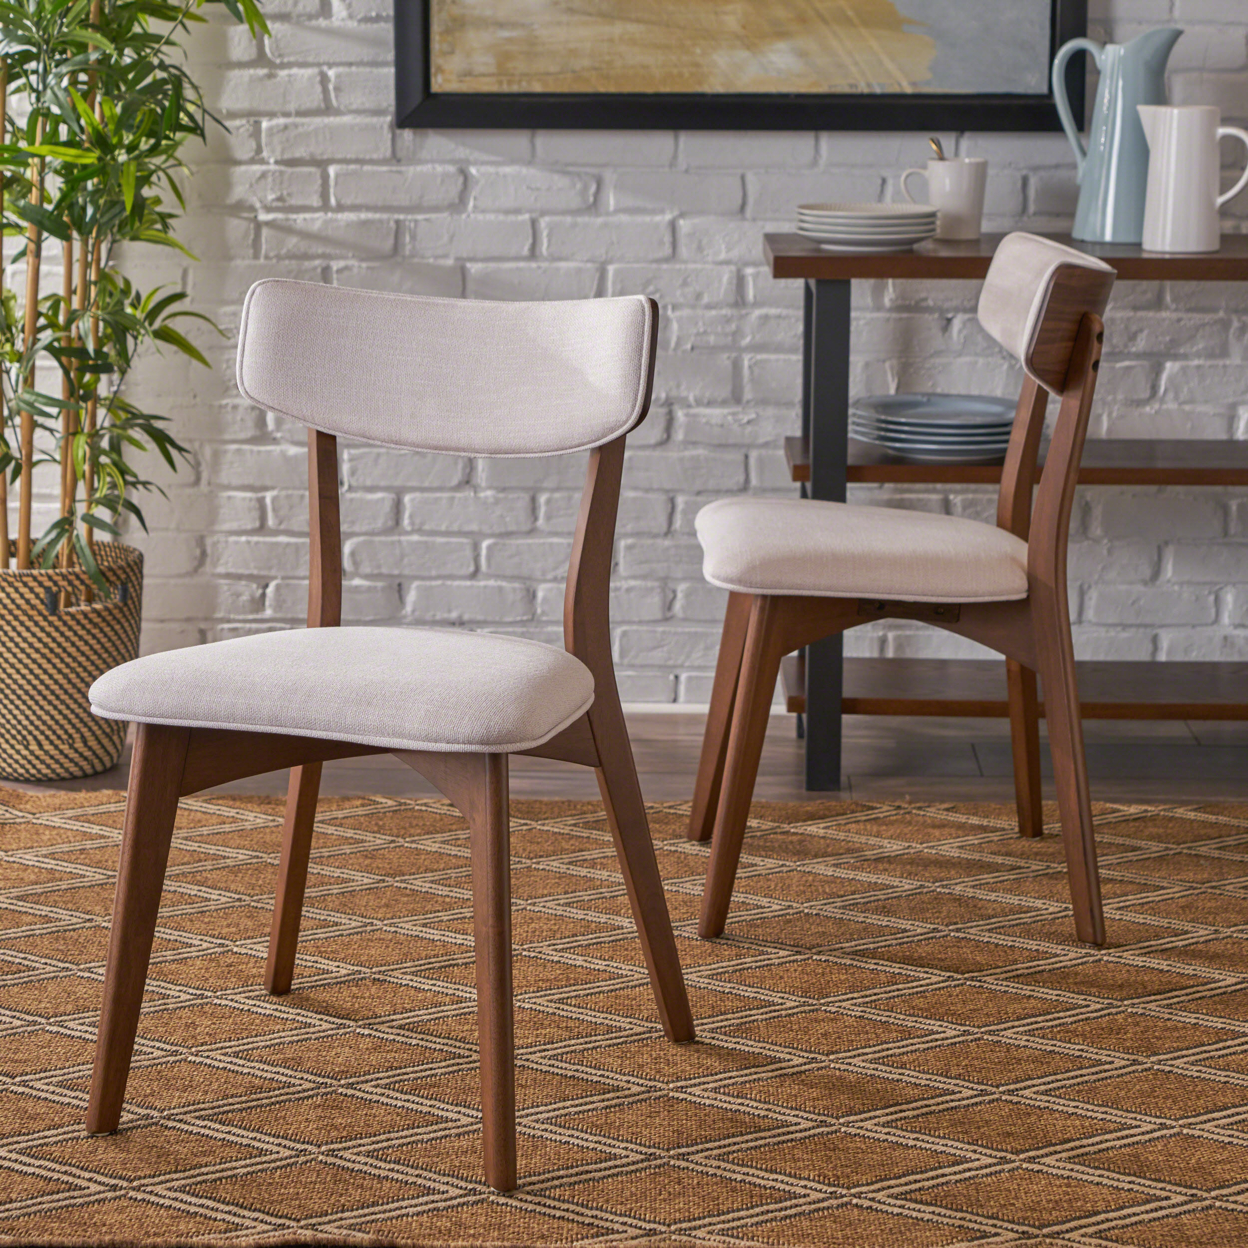 Molly Mid Century Modern Dining Chairs With Rubberwood Frame (Set Of 2) - Light Beige/Natural Walnut